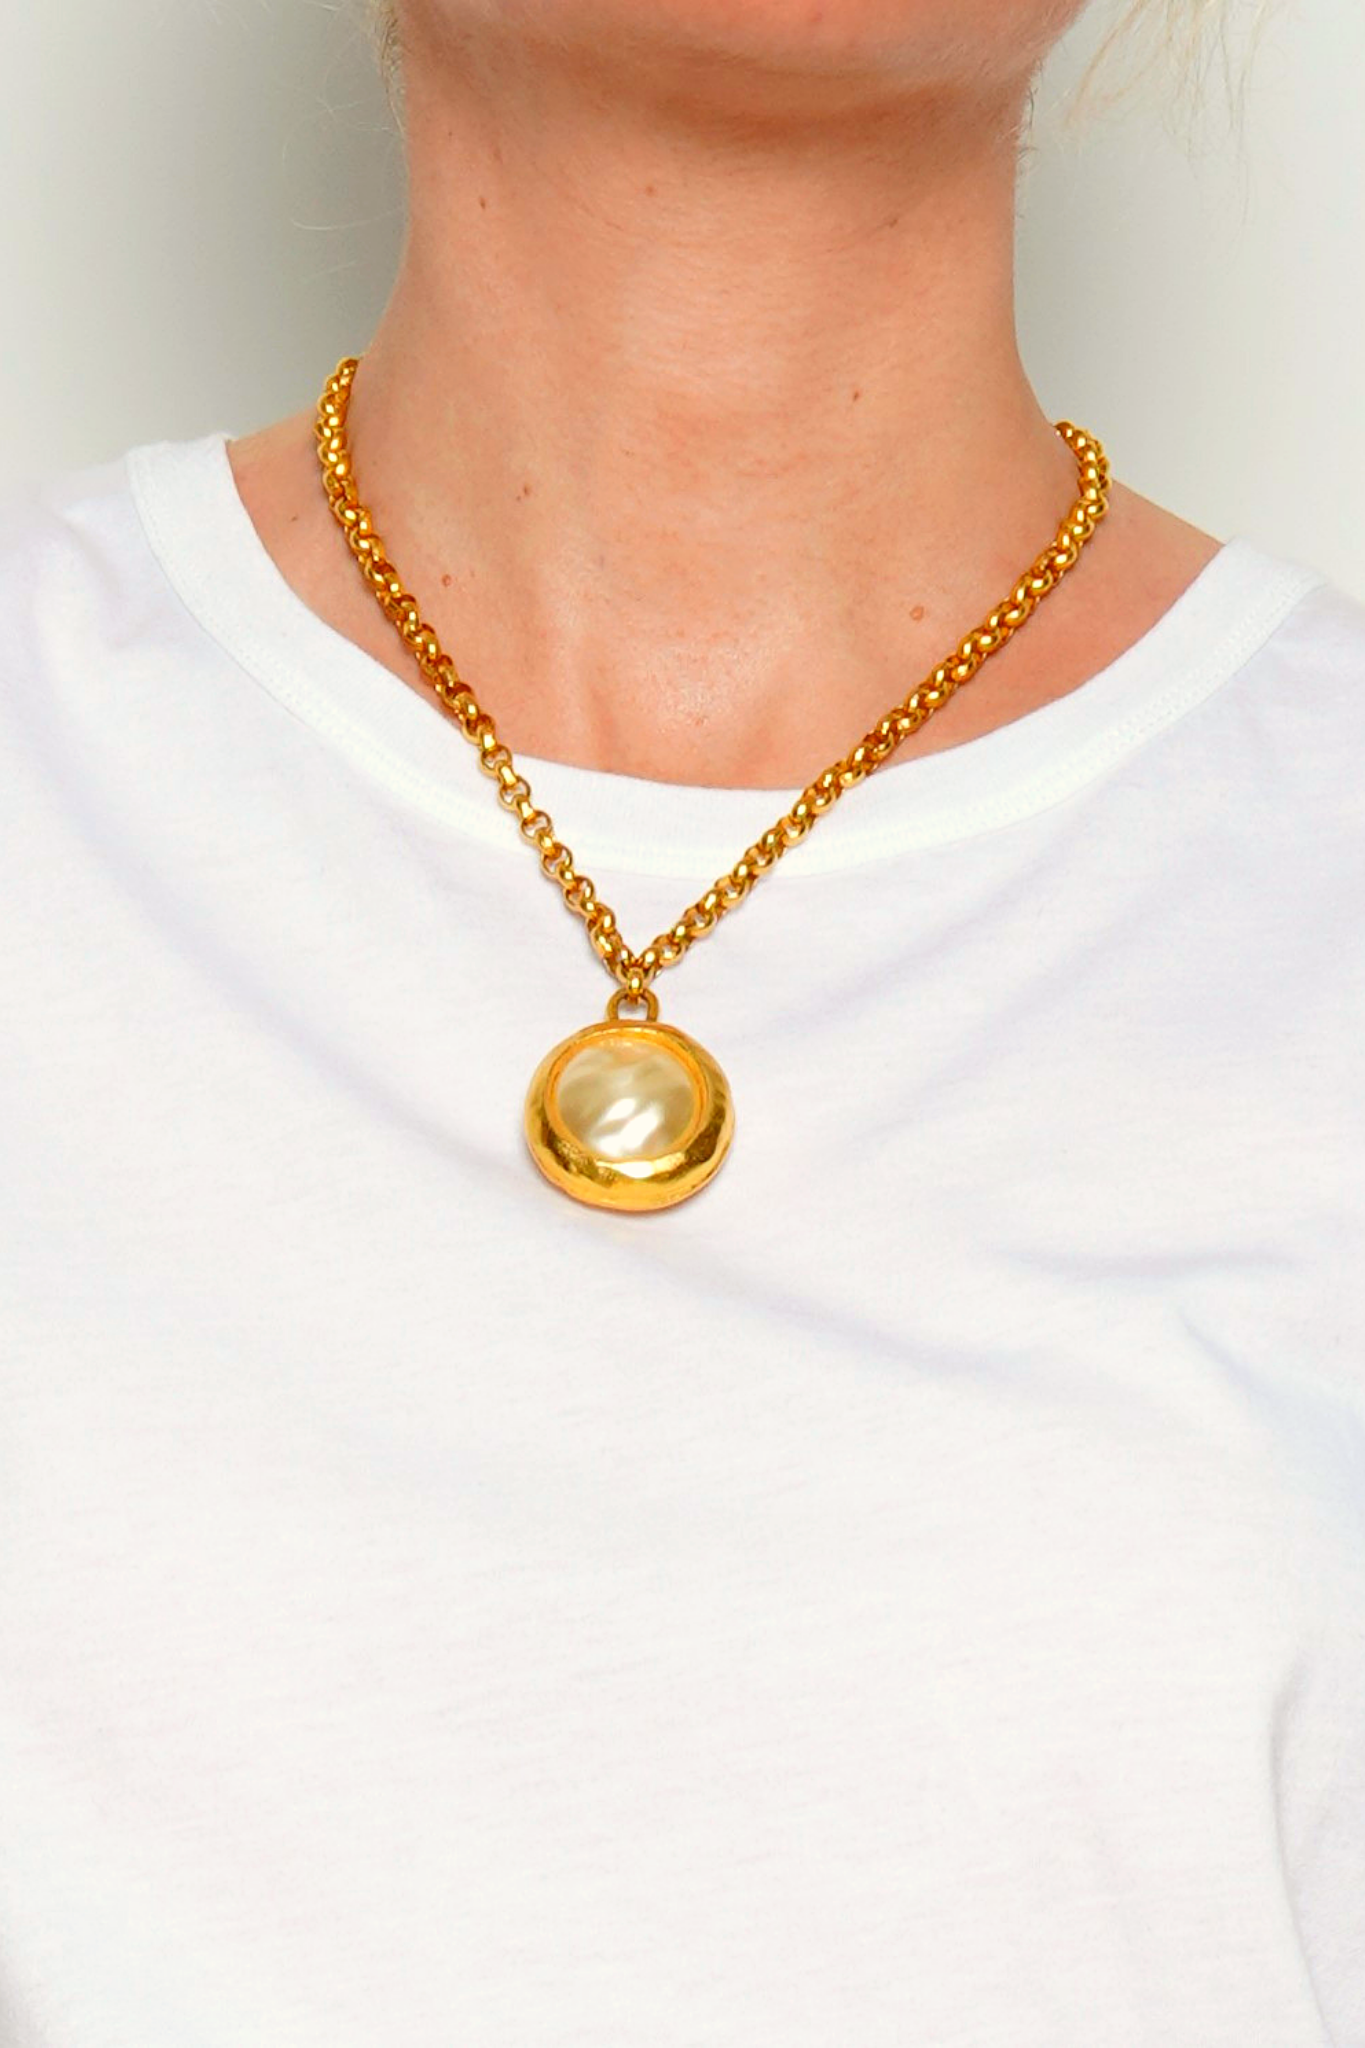 Vintage-Inspired Pearl Pendant with Golden Chain.